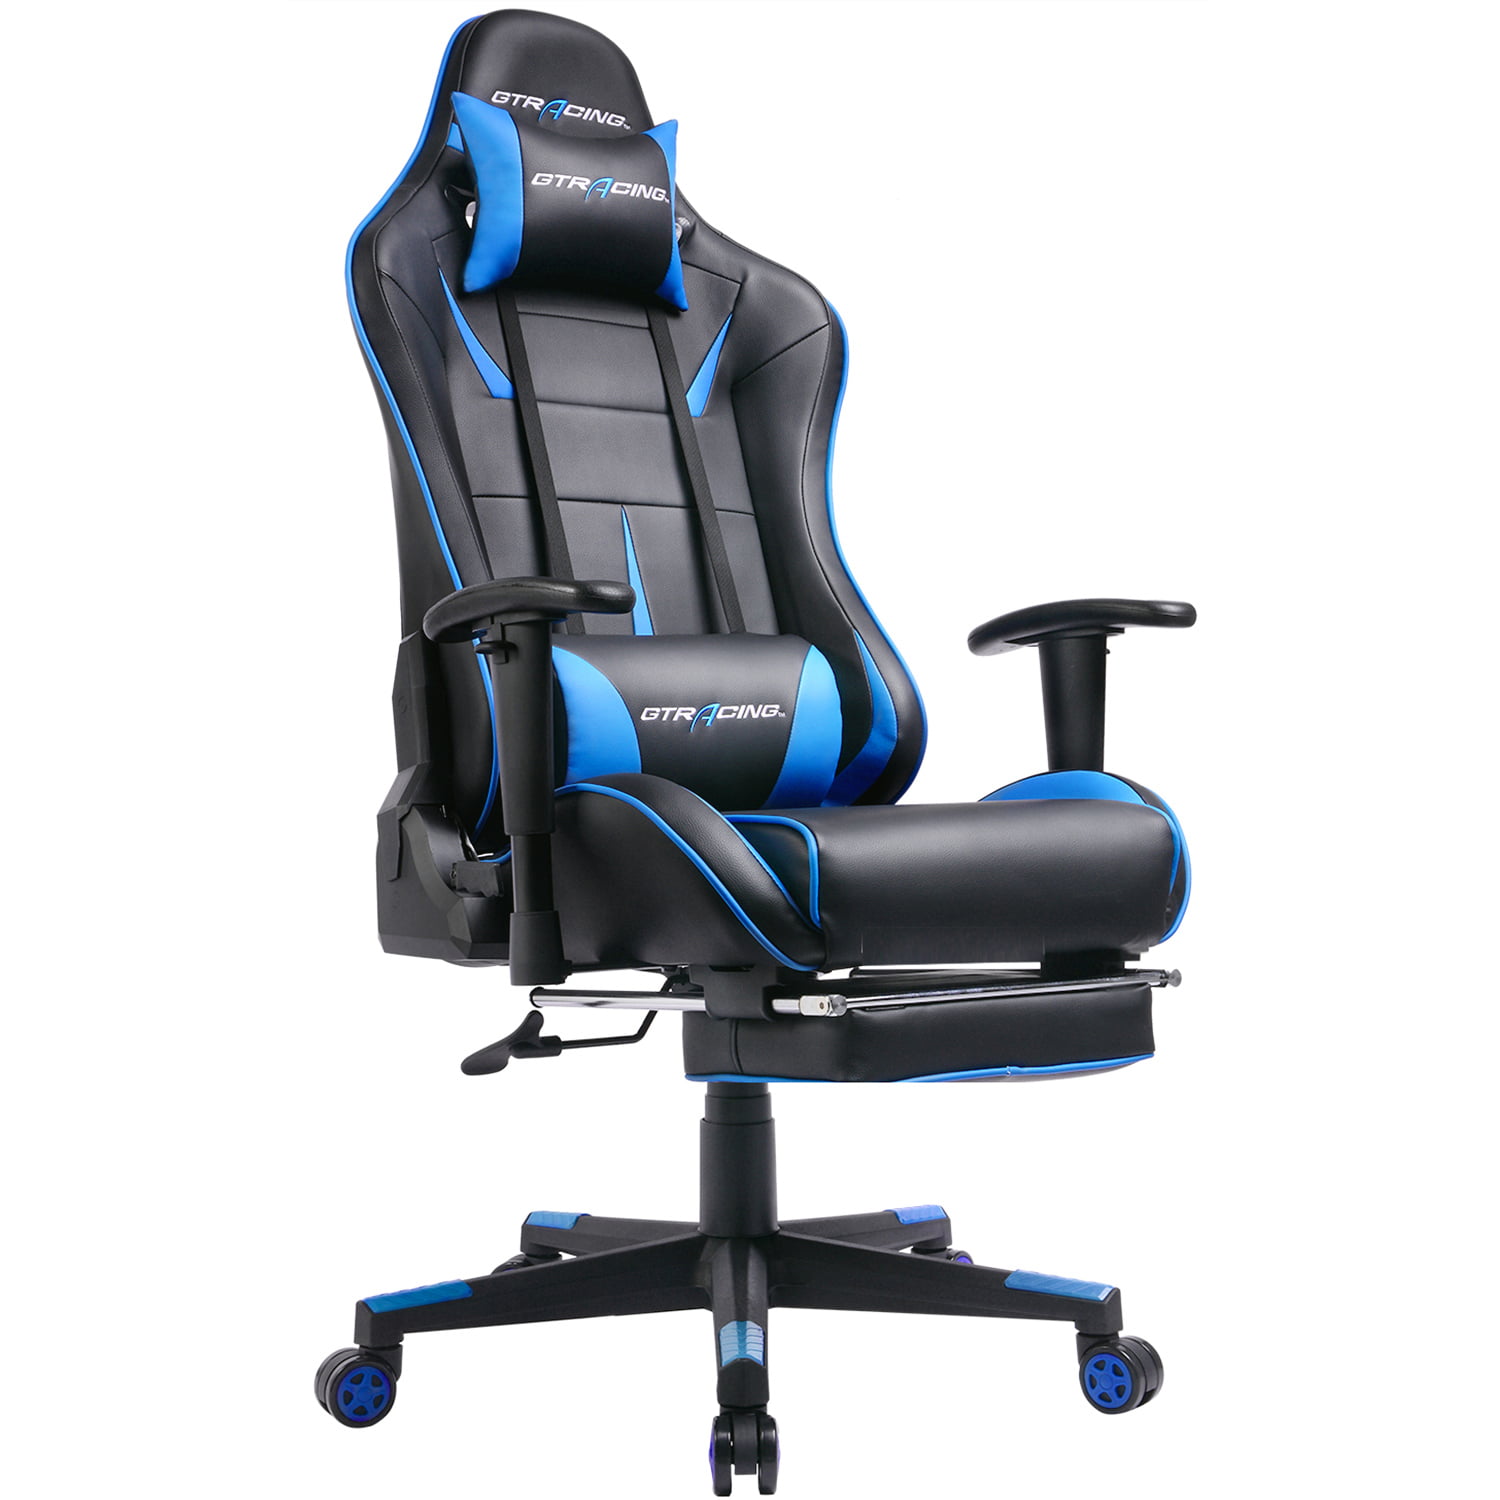 GTRACING Gaming Chair with Footrest Racing Heavy Duty Big & Tall Adjustable Recliner with Headrest Lumbar Support Pillow High Back Ergonomic Computer Desk Executive Office Chair GT909 Blue 